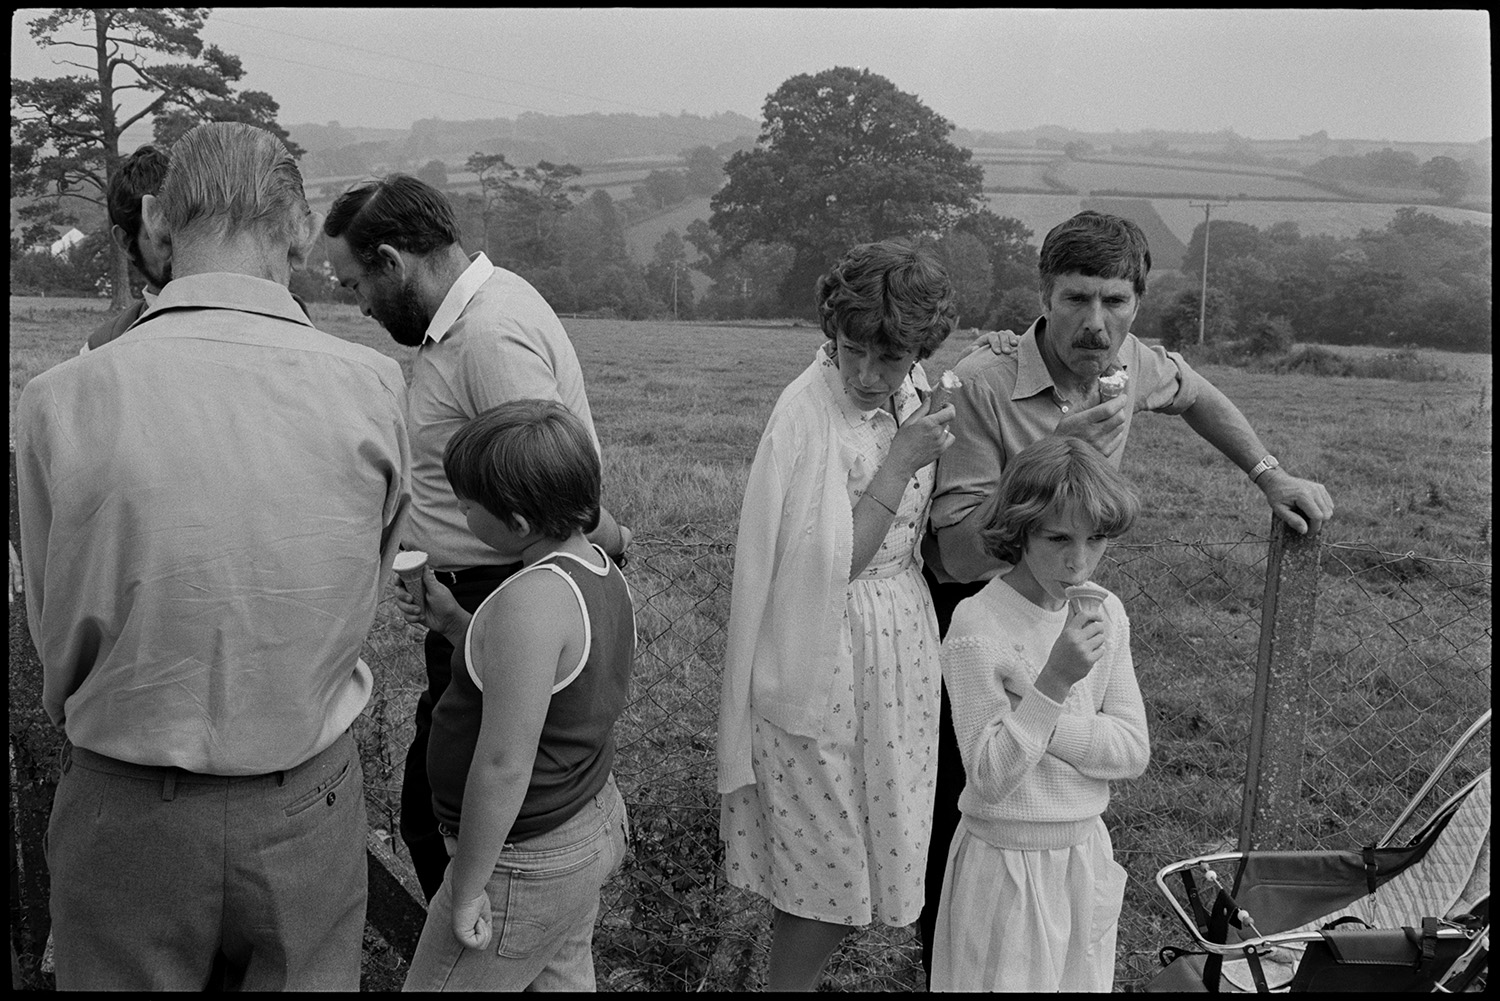 Flower show exhibits, jams, cups, sports, hot dog stall, bicycles, Clay Pigeon Shoot.
[Men, women and children at Dolton Flower Show eating ice creams, in a field with a wooded landscape in the background.]